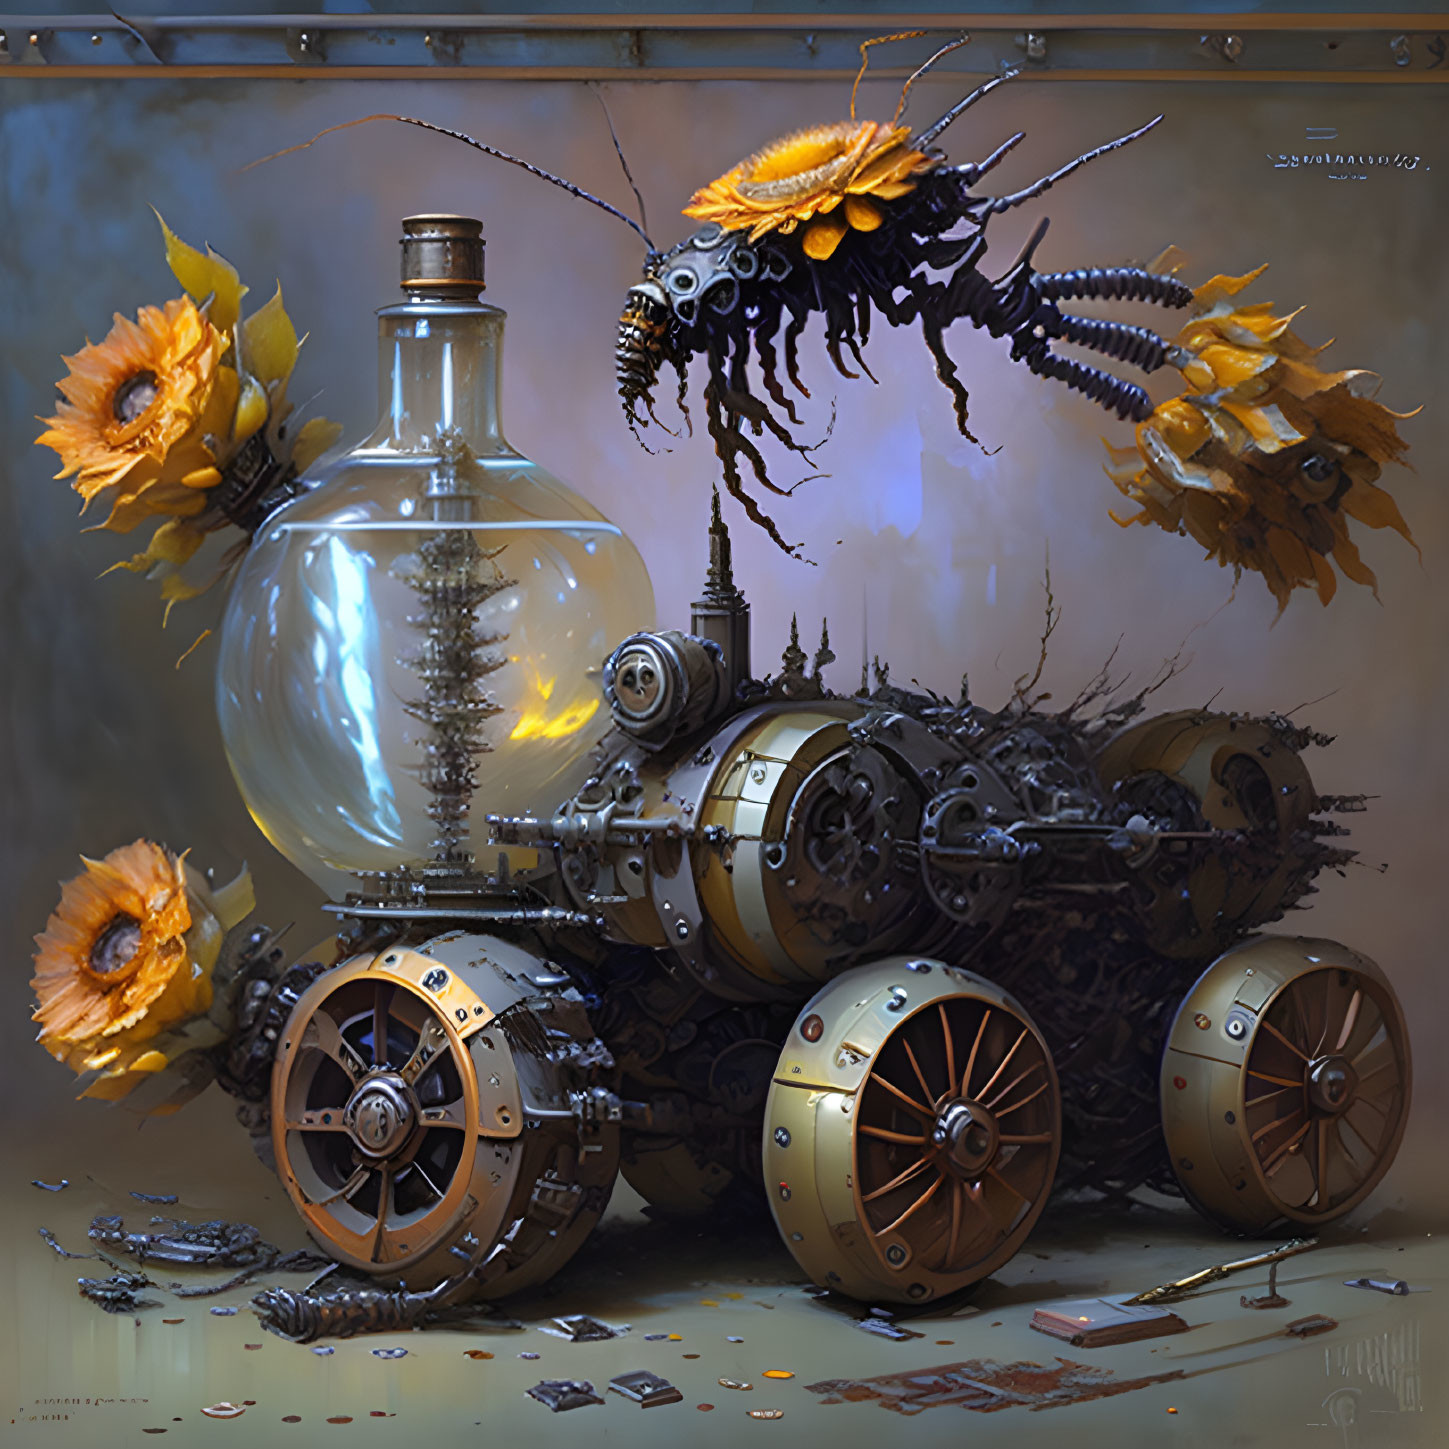 Steampunk-inspired contraption with mechanical wheels, gears, clear bottle, orange flowers, and insect